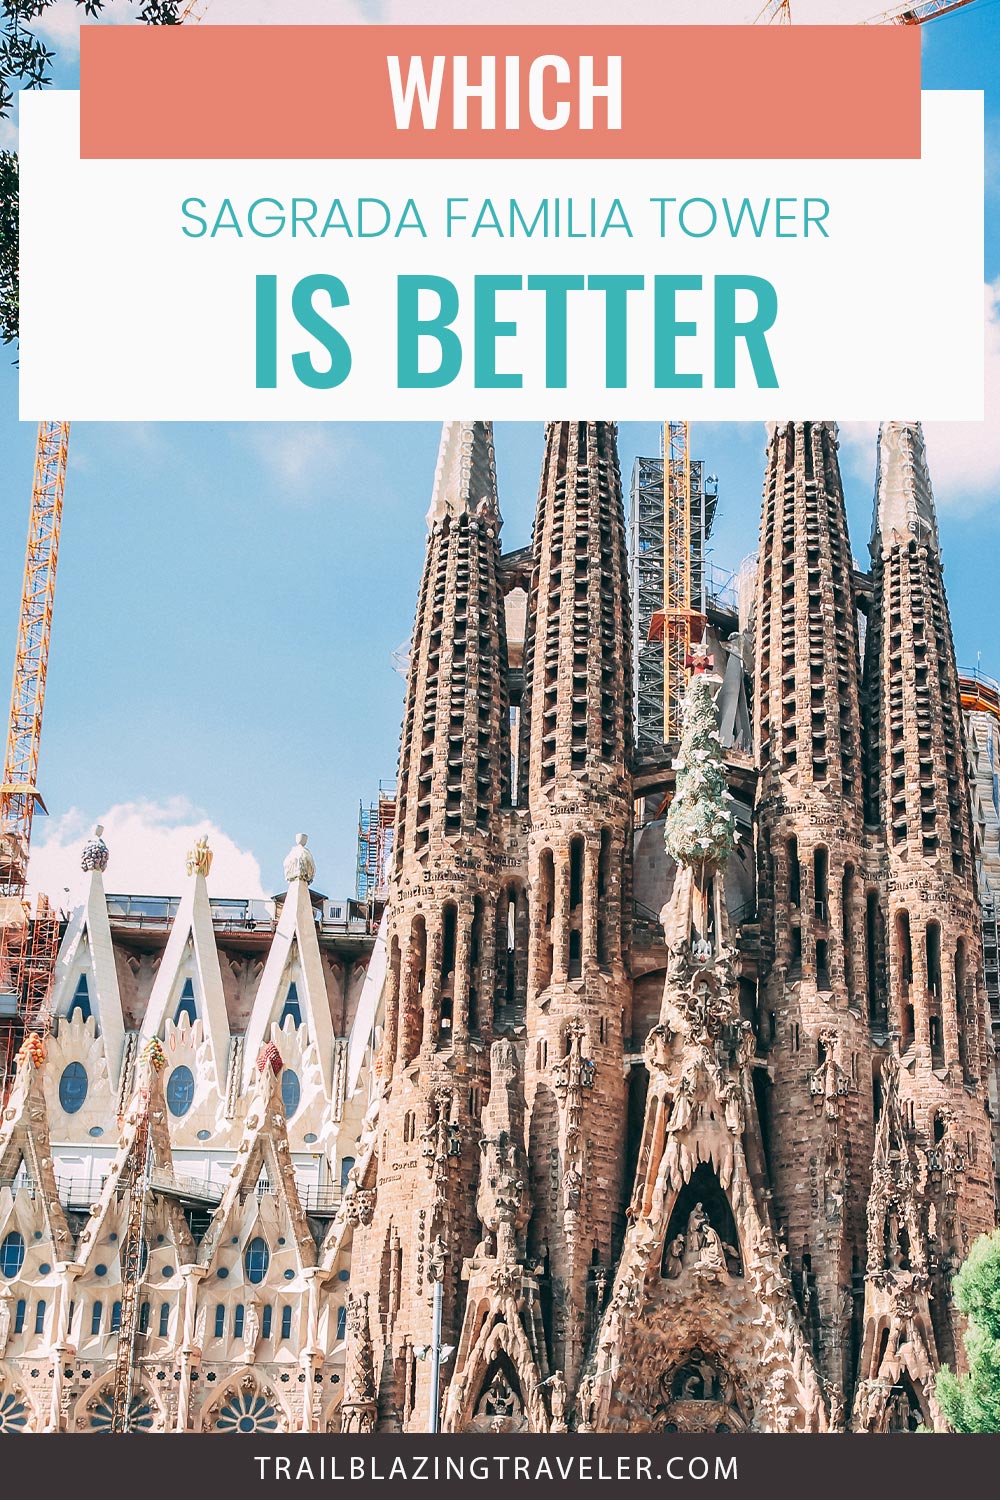 The towers of the Basilica of the Sagrada Família - which is better?